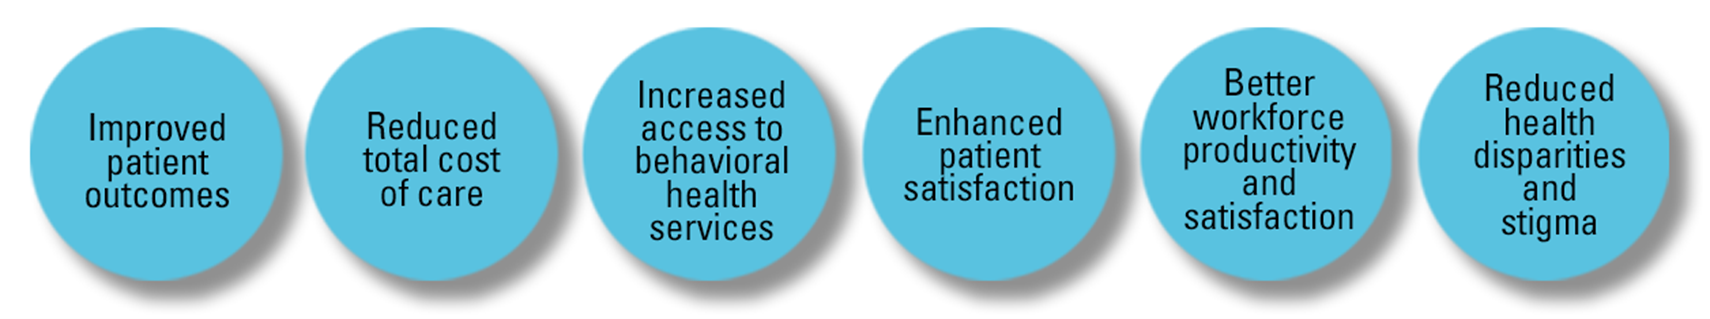 Six positive impacts that can be achieved by integrating physical and behavioral health services: Improved patient outcomes. Reduced total cost of care. Increased access to behavioral health services. Enhanced patient satisfaction. Better workforce productivity and satisfaction. Reduced health disparities and stigma.